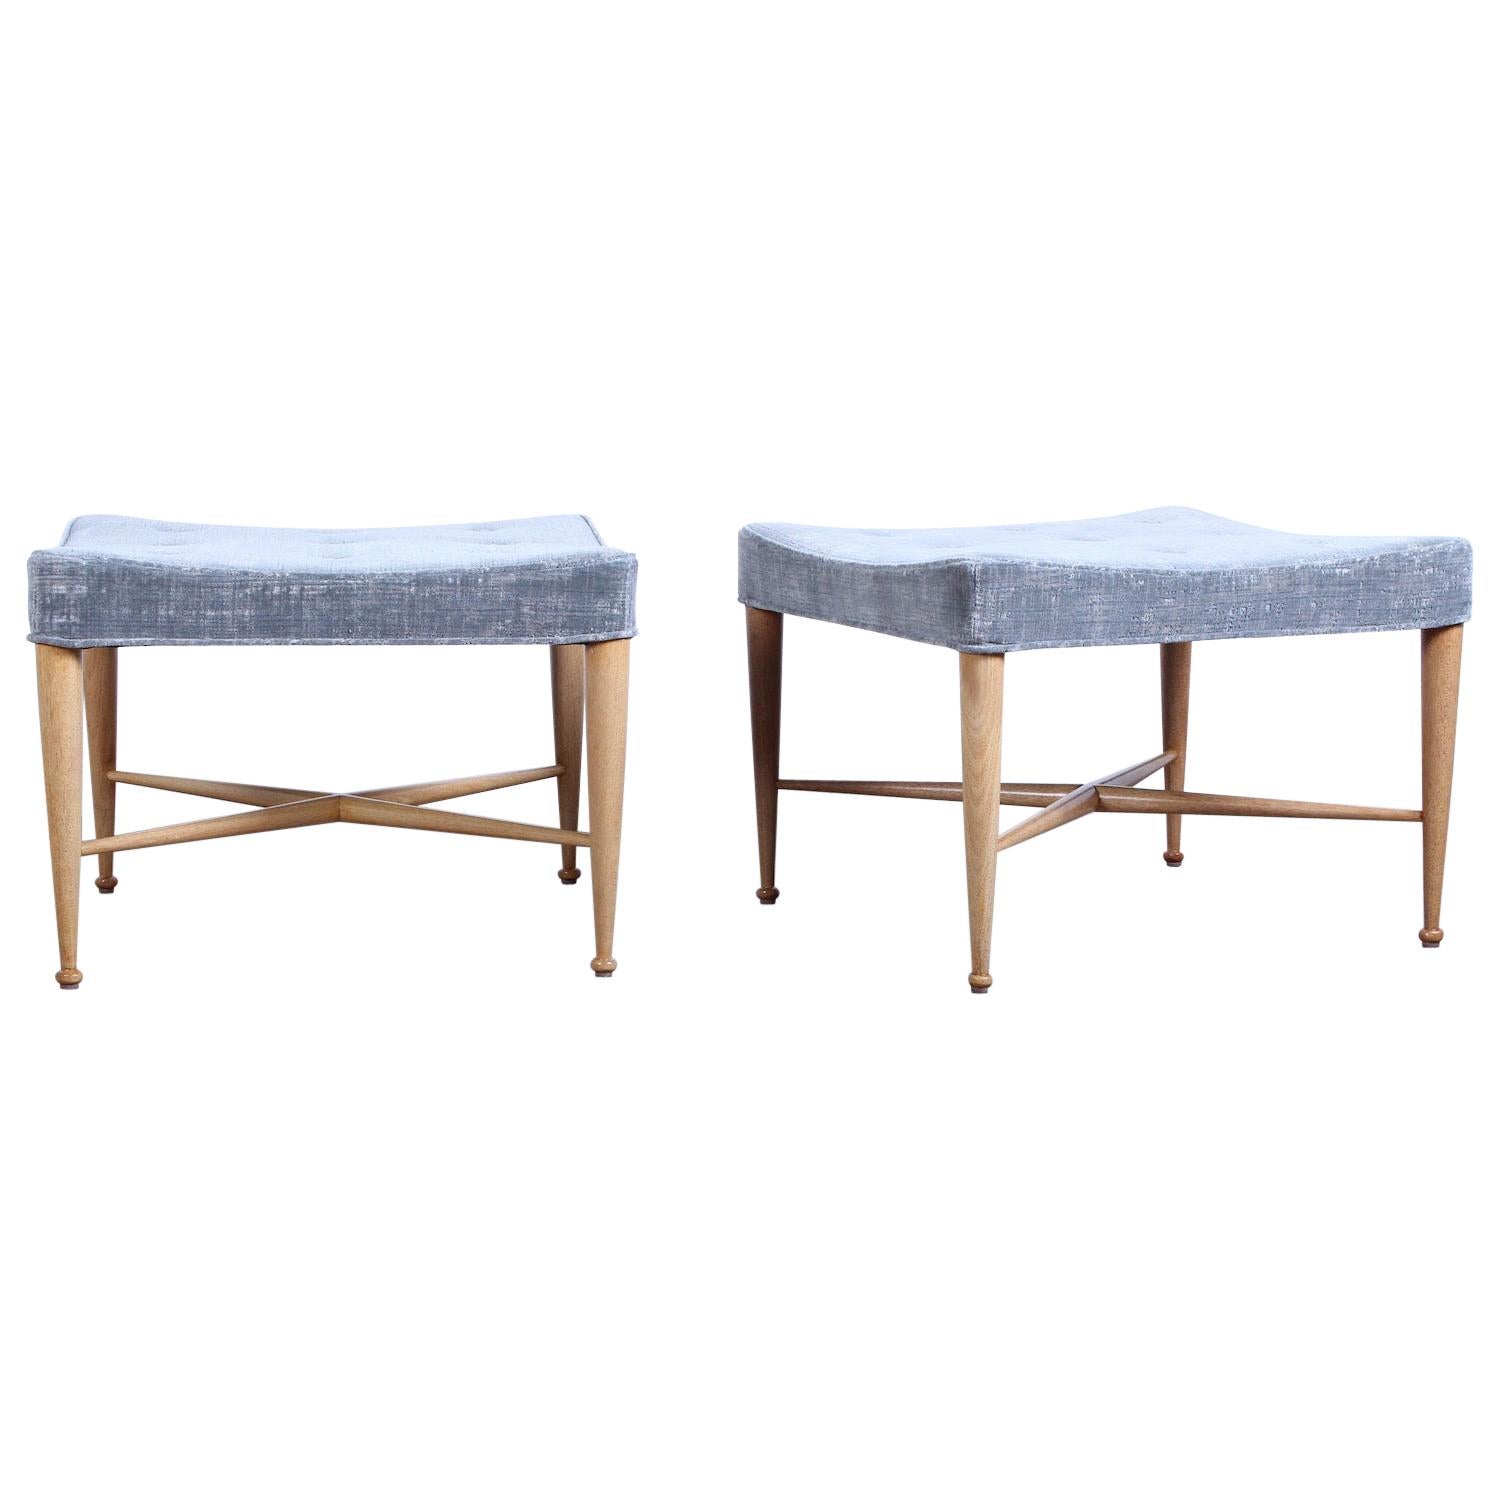 Pair of Dunbar Thebes Stools by Edward Wormley